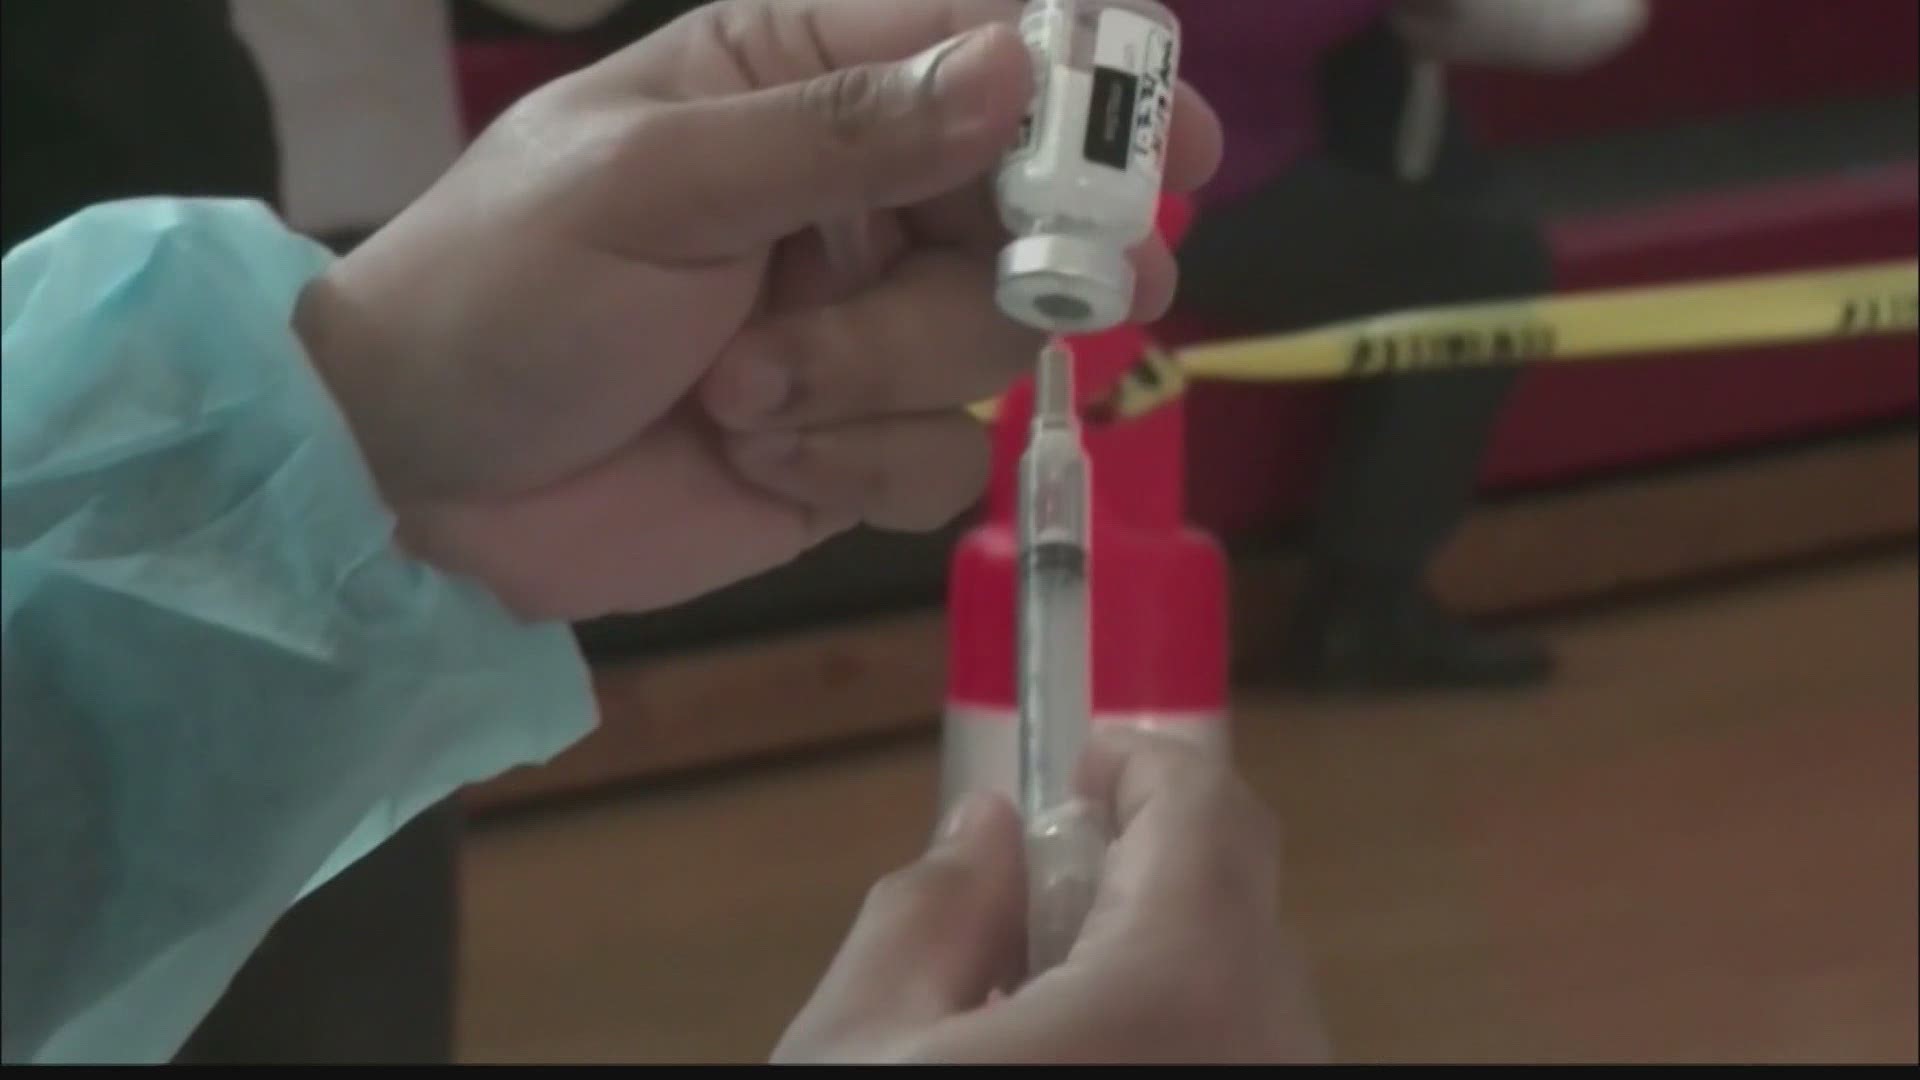 State health officials say they're facing challenges regarding COVID-19 vaccine distribution.